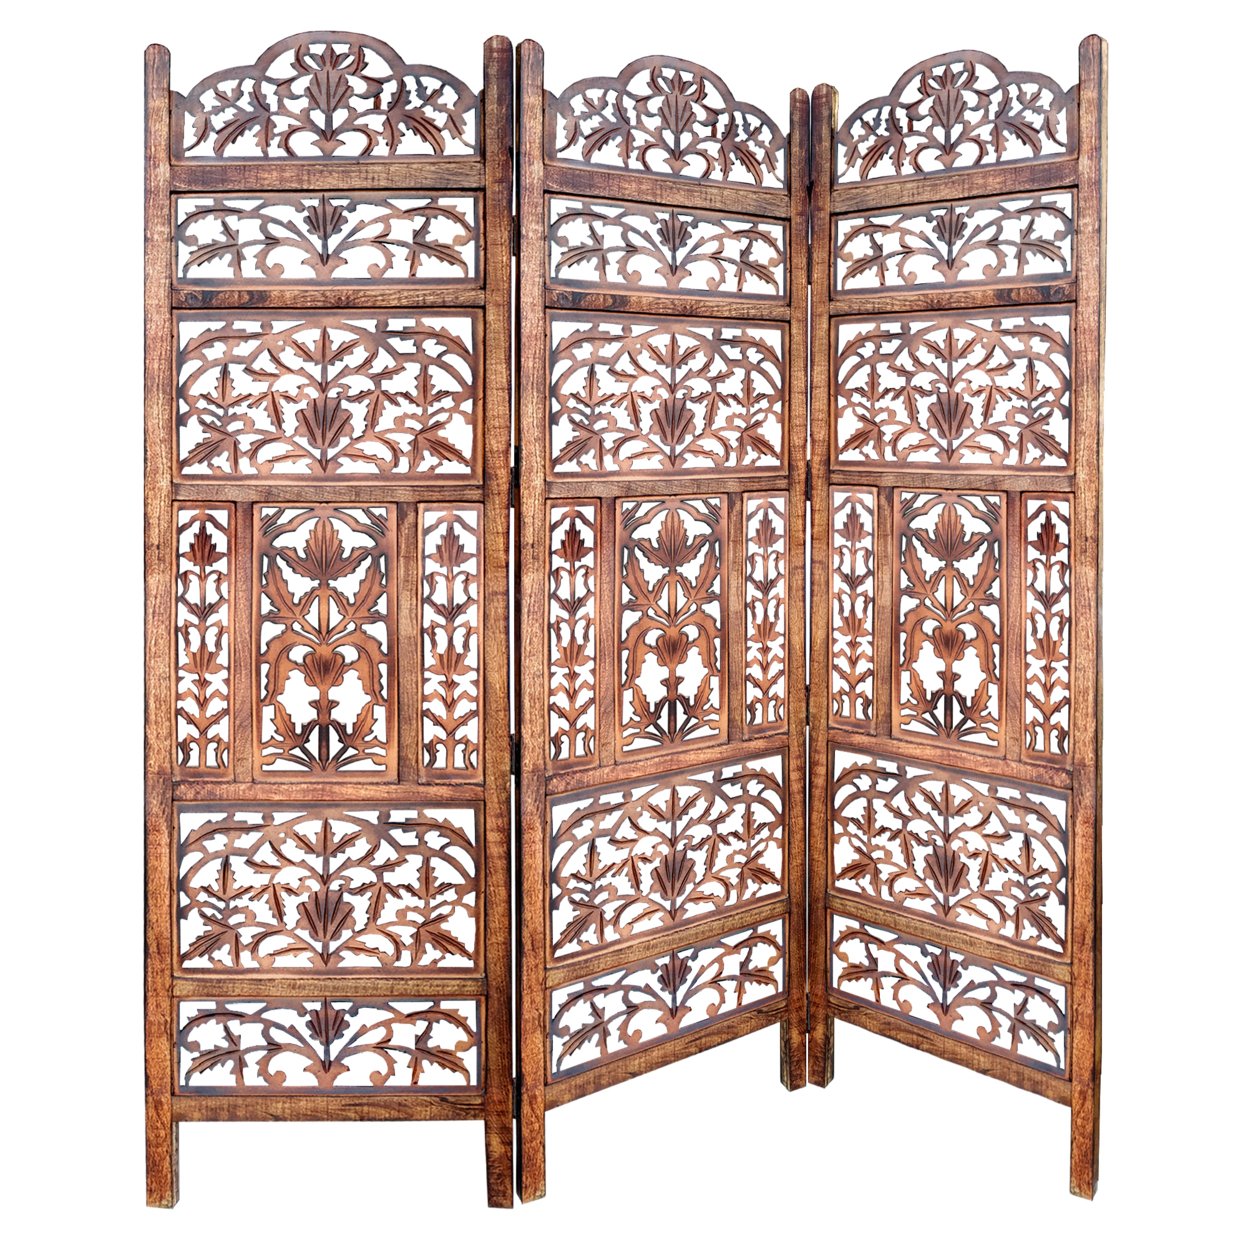 Handcrafted 3 Panel Mango Wood Screen With Cutout Filigree Carvings, Brown- Saltoro Sherpi